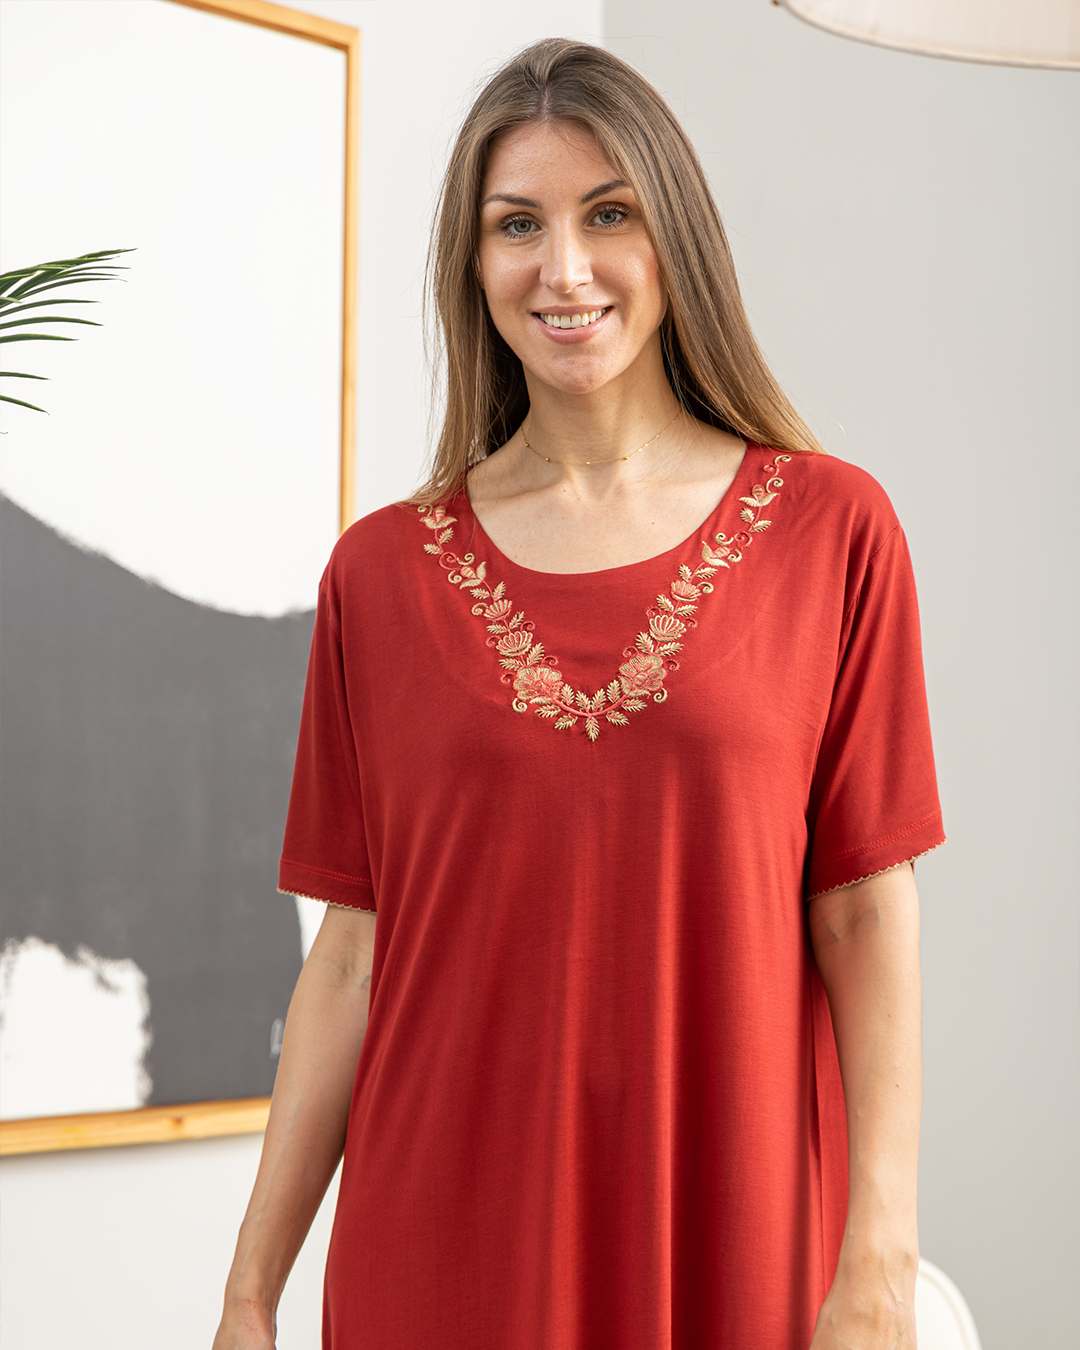 Women's shirt, half sleeves, embroidered with long branches